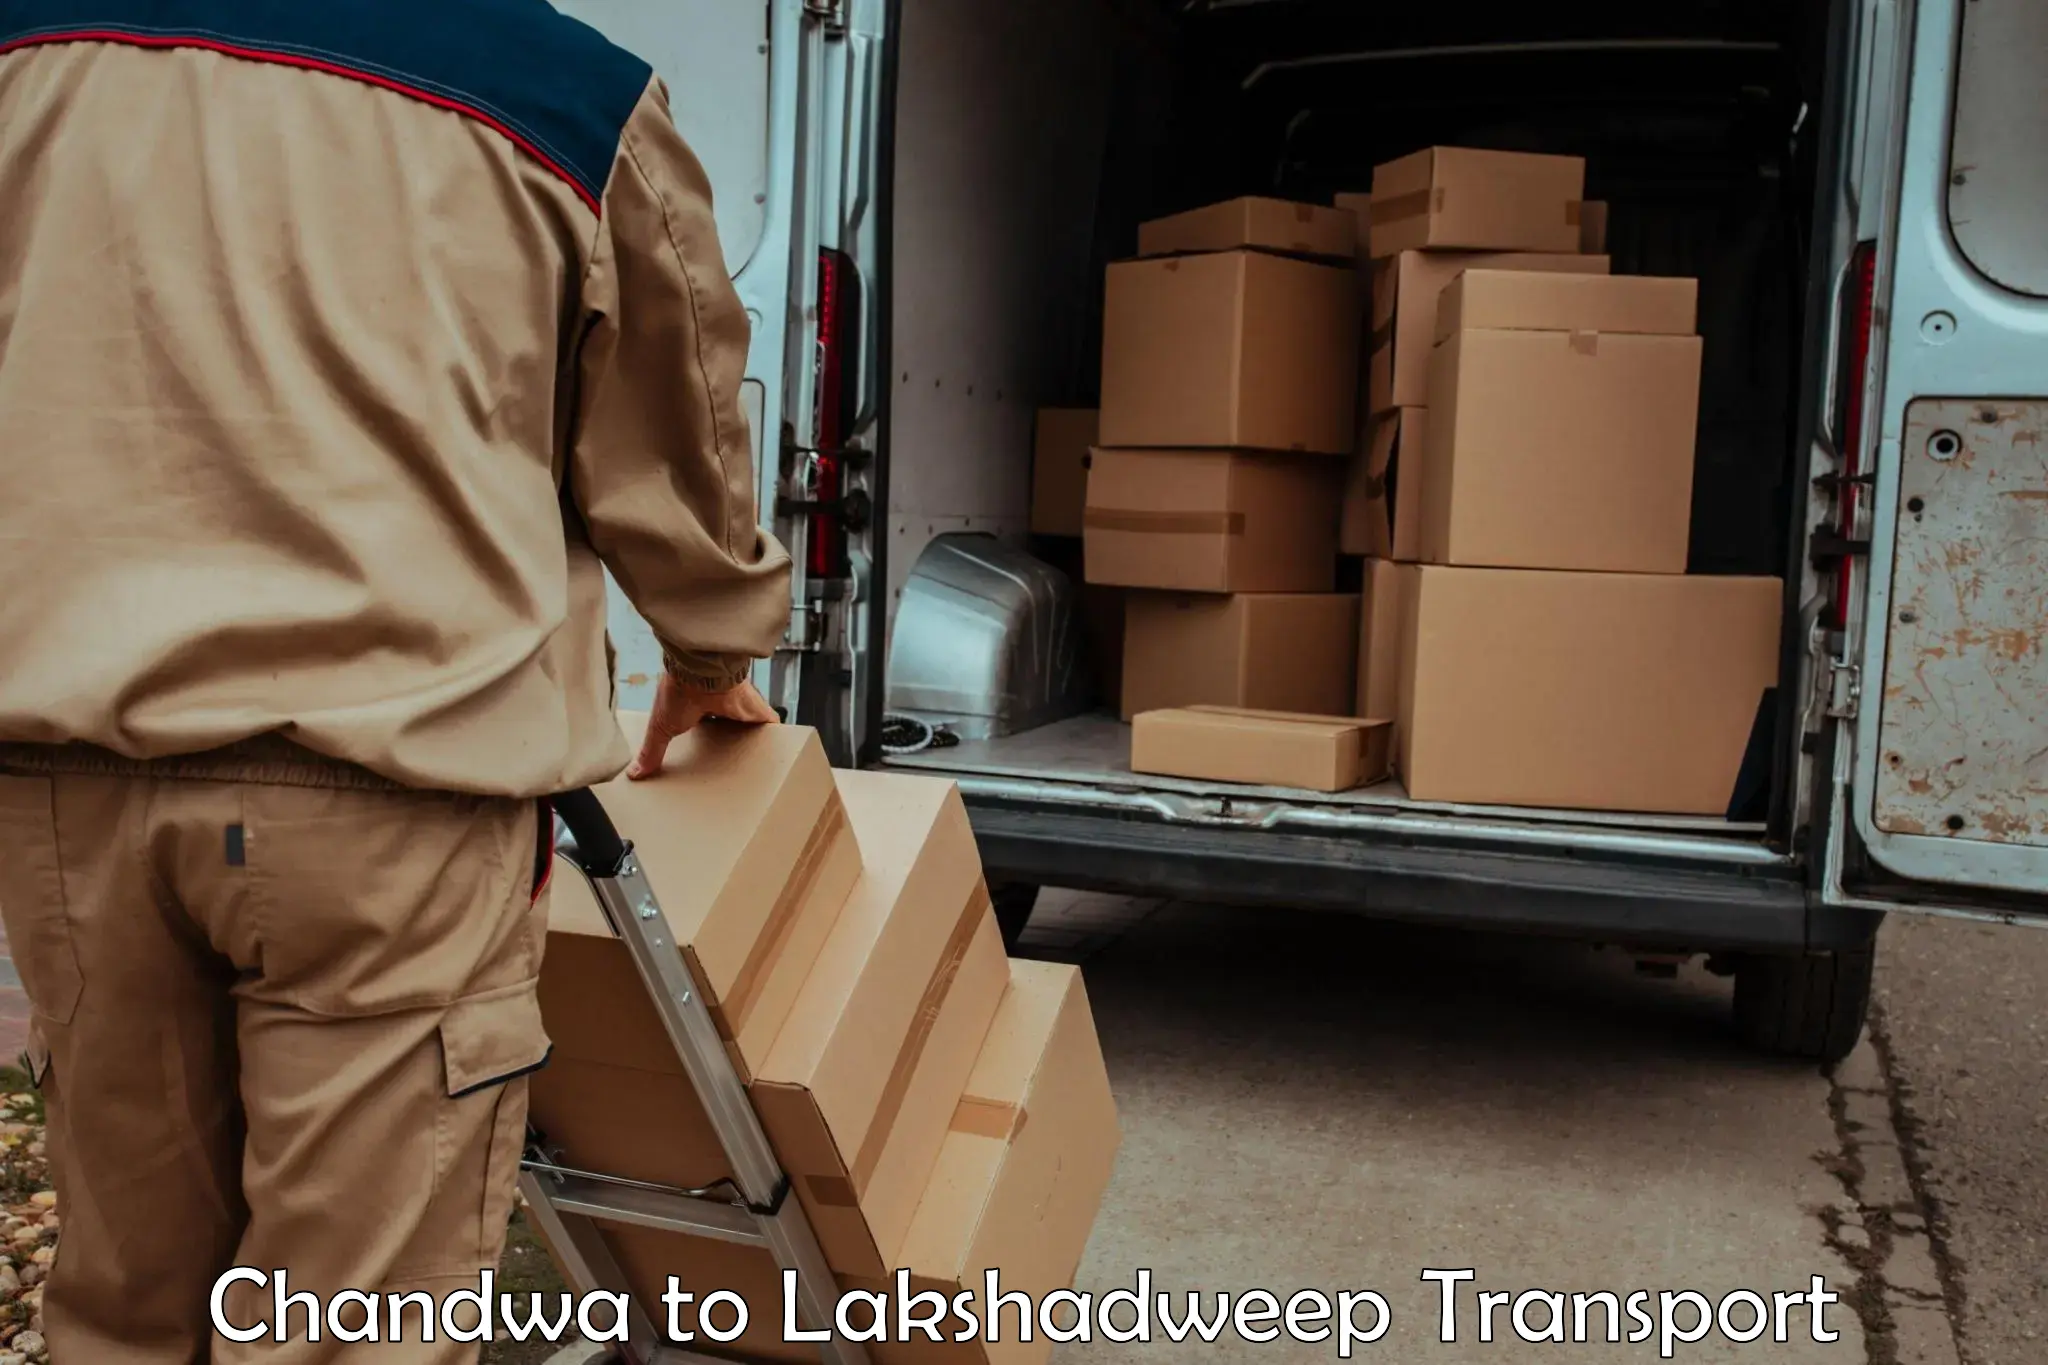 Daily parcel service transport Chandwa to Lakshadweep